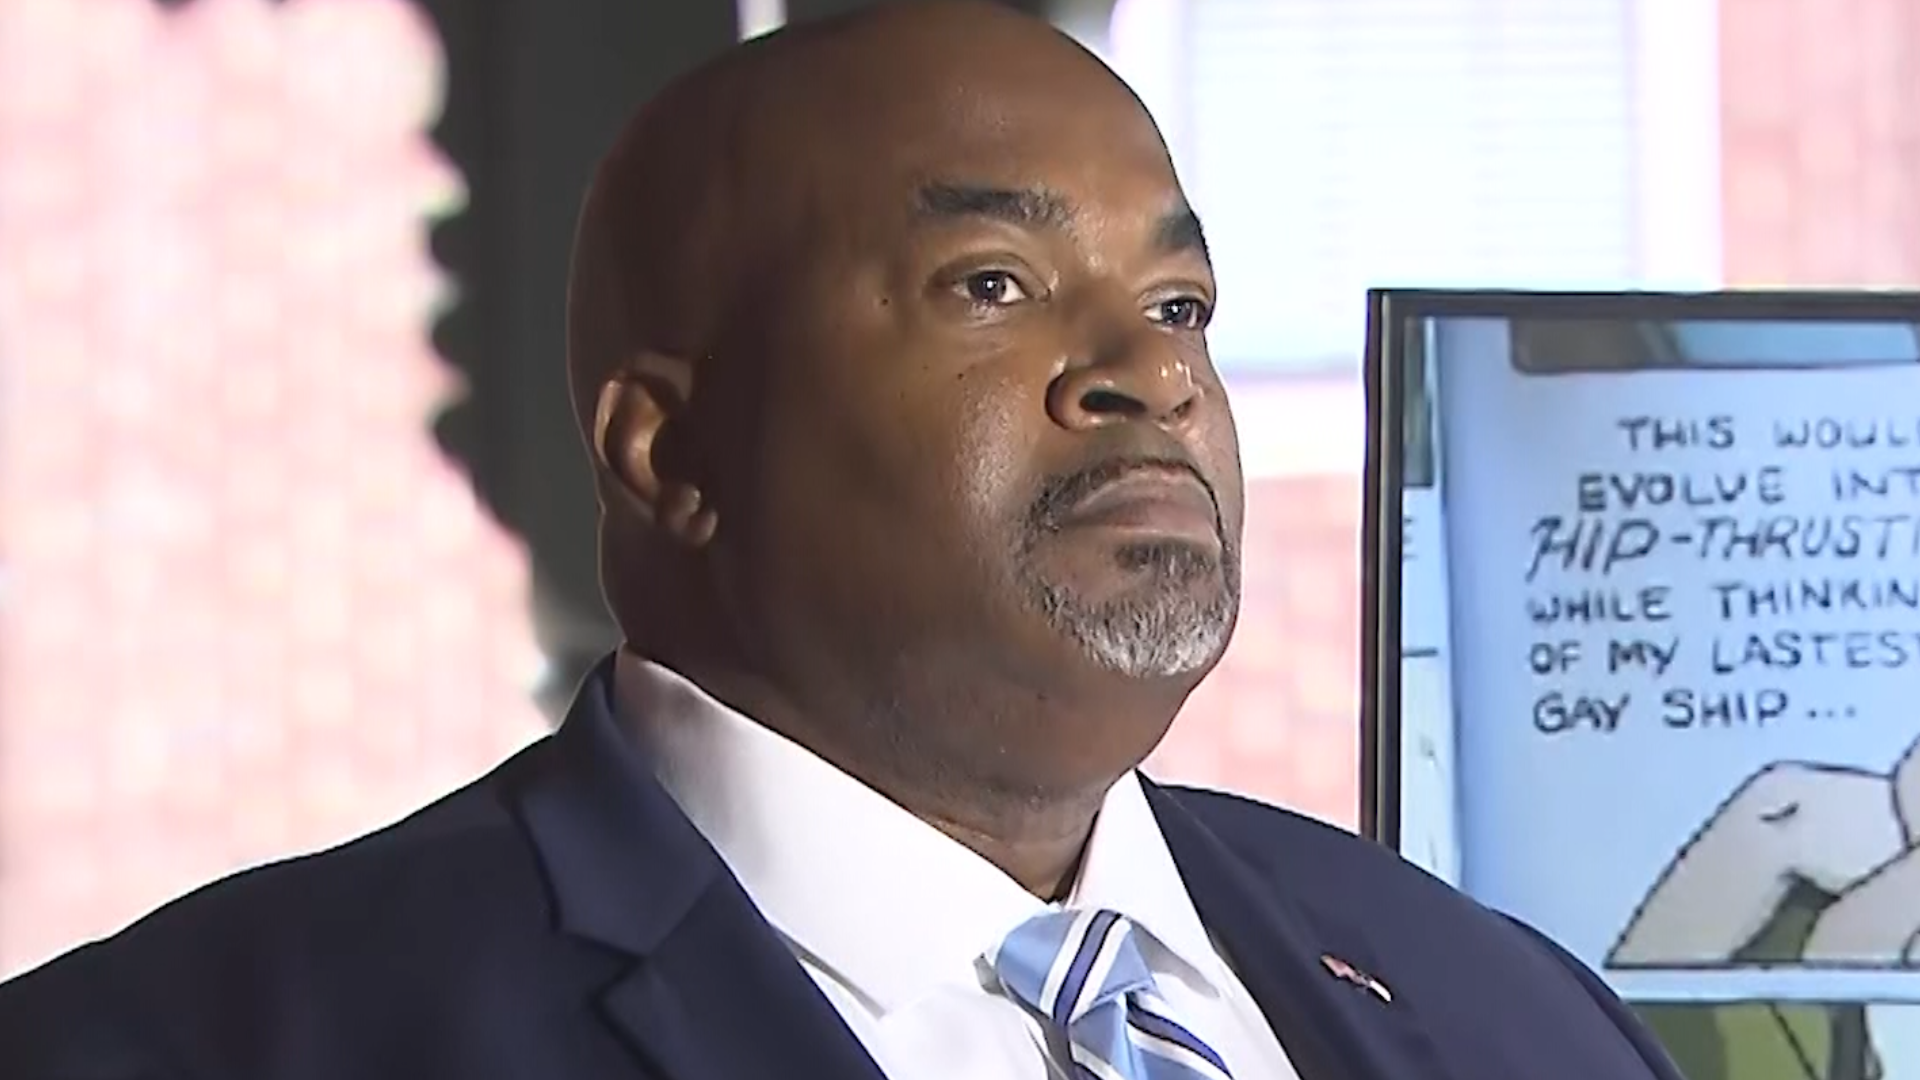 Lt. Gov. Mark Robinson said he won't back down from removing "highly sexual" material from North Carolina schools, despite attacks from the LGBTQ community.